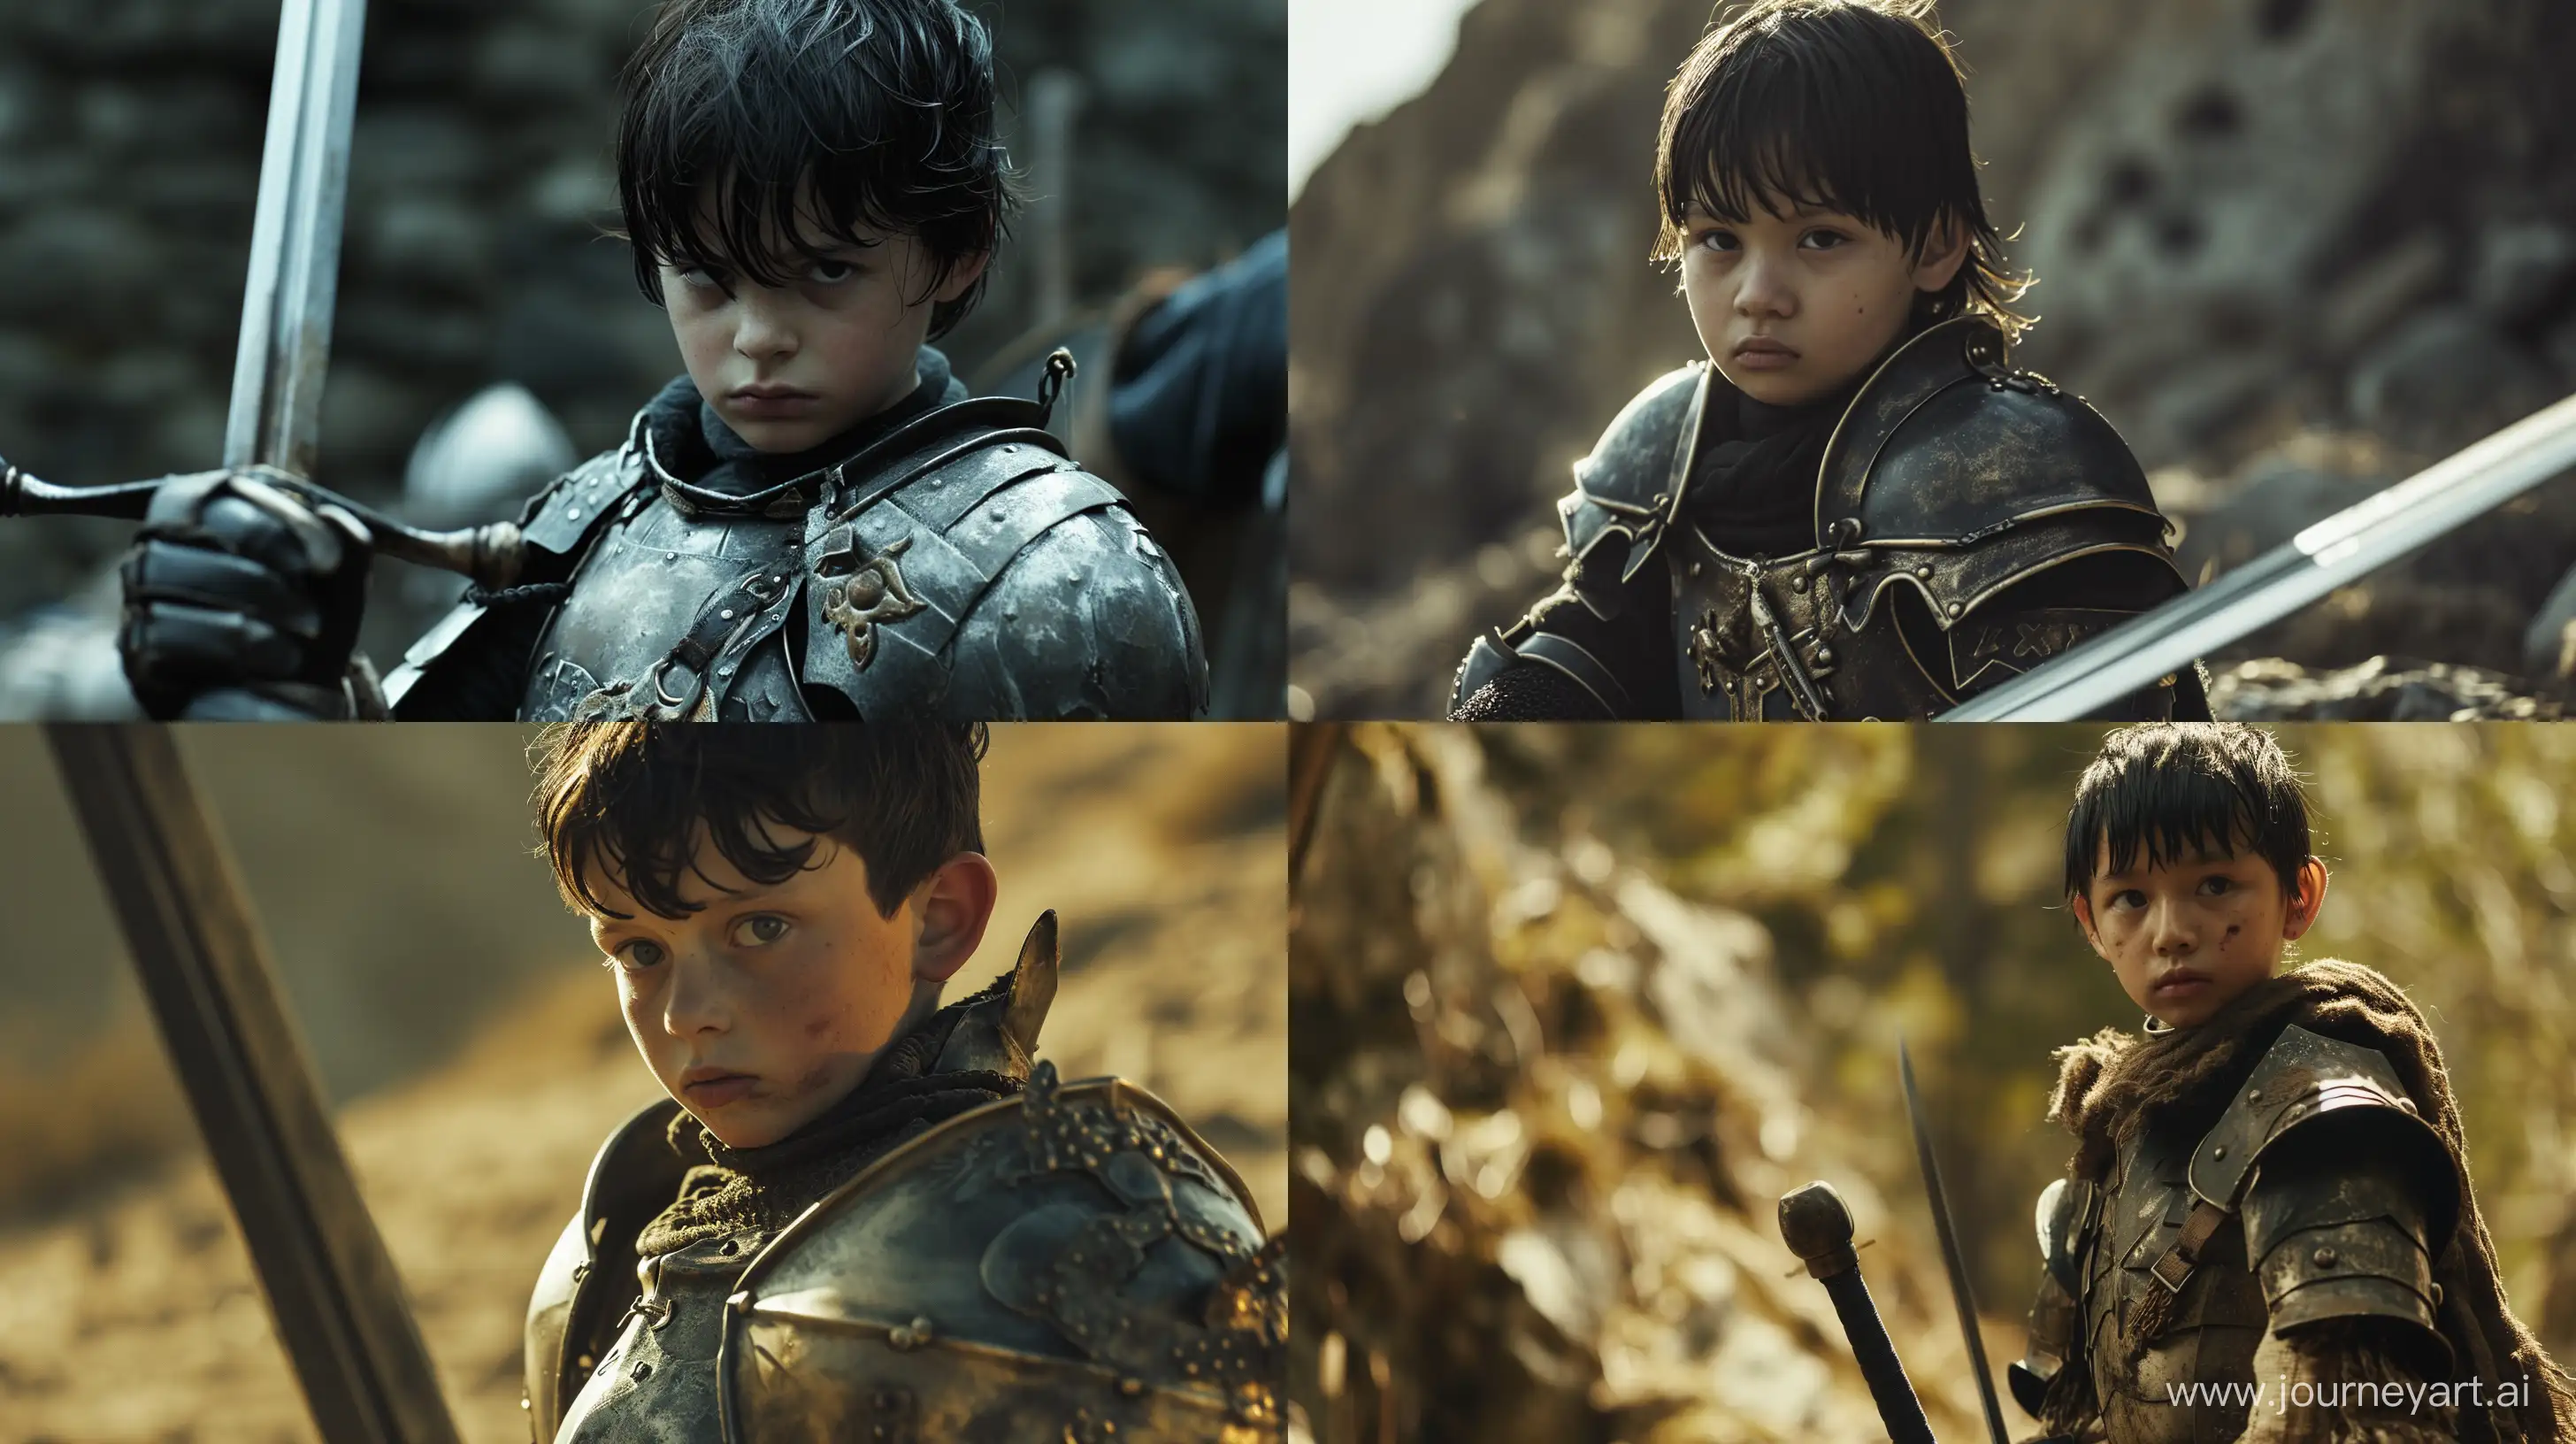 Epic-Cinematic-Portrait-Jared-Letos-Child-in-Griffith-Armor-with-Stormbringer-Sword